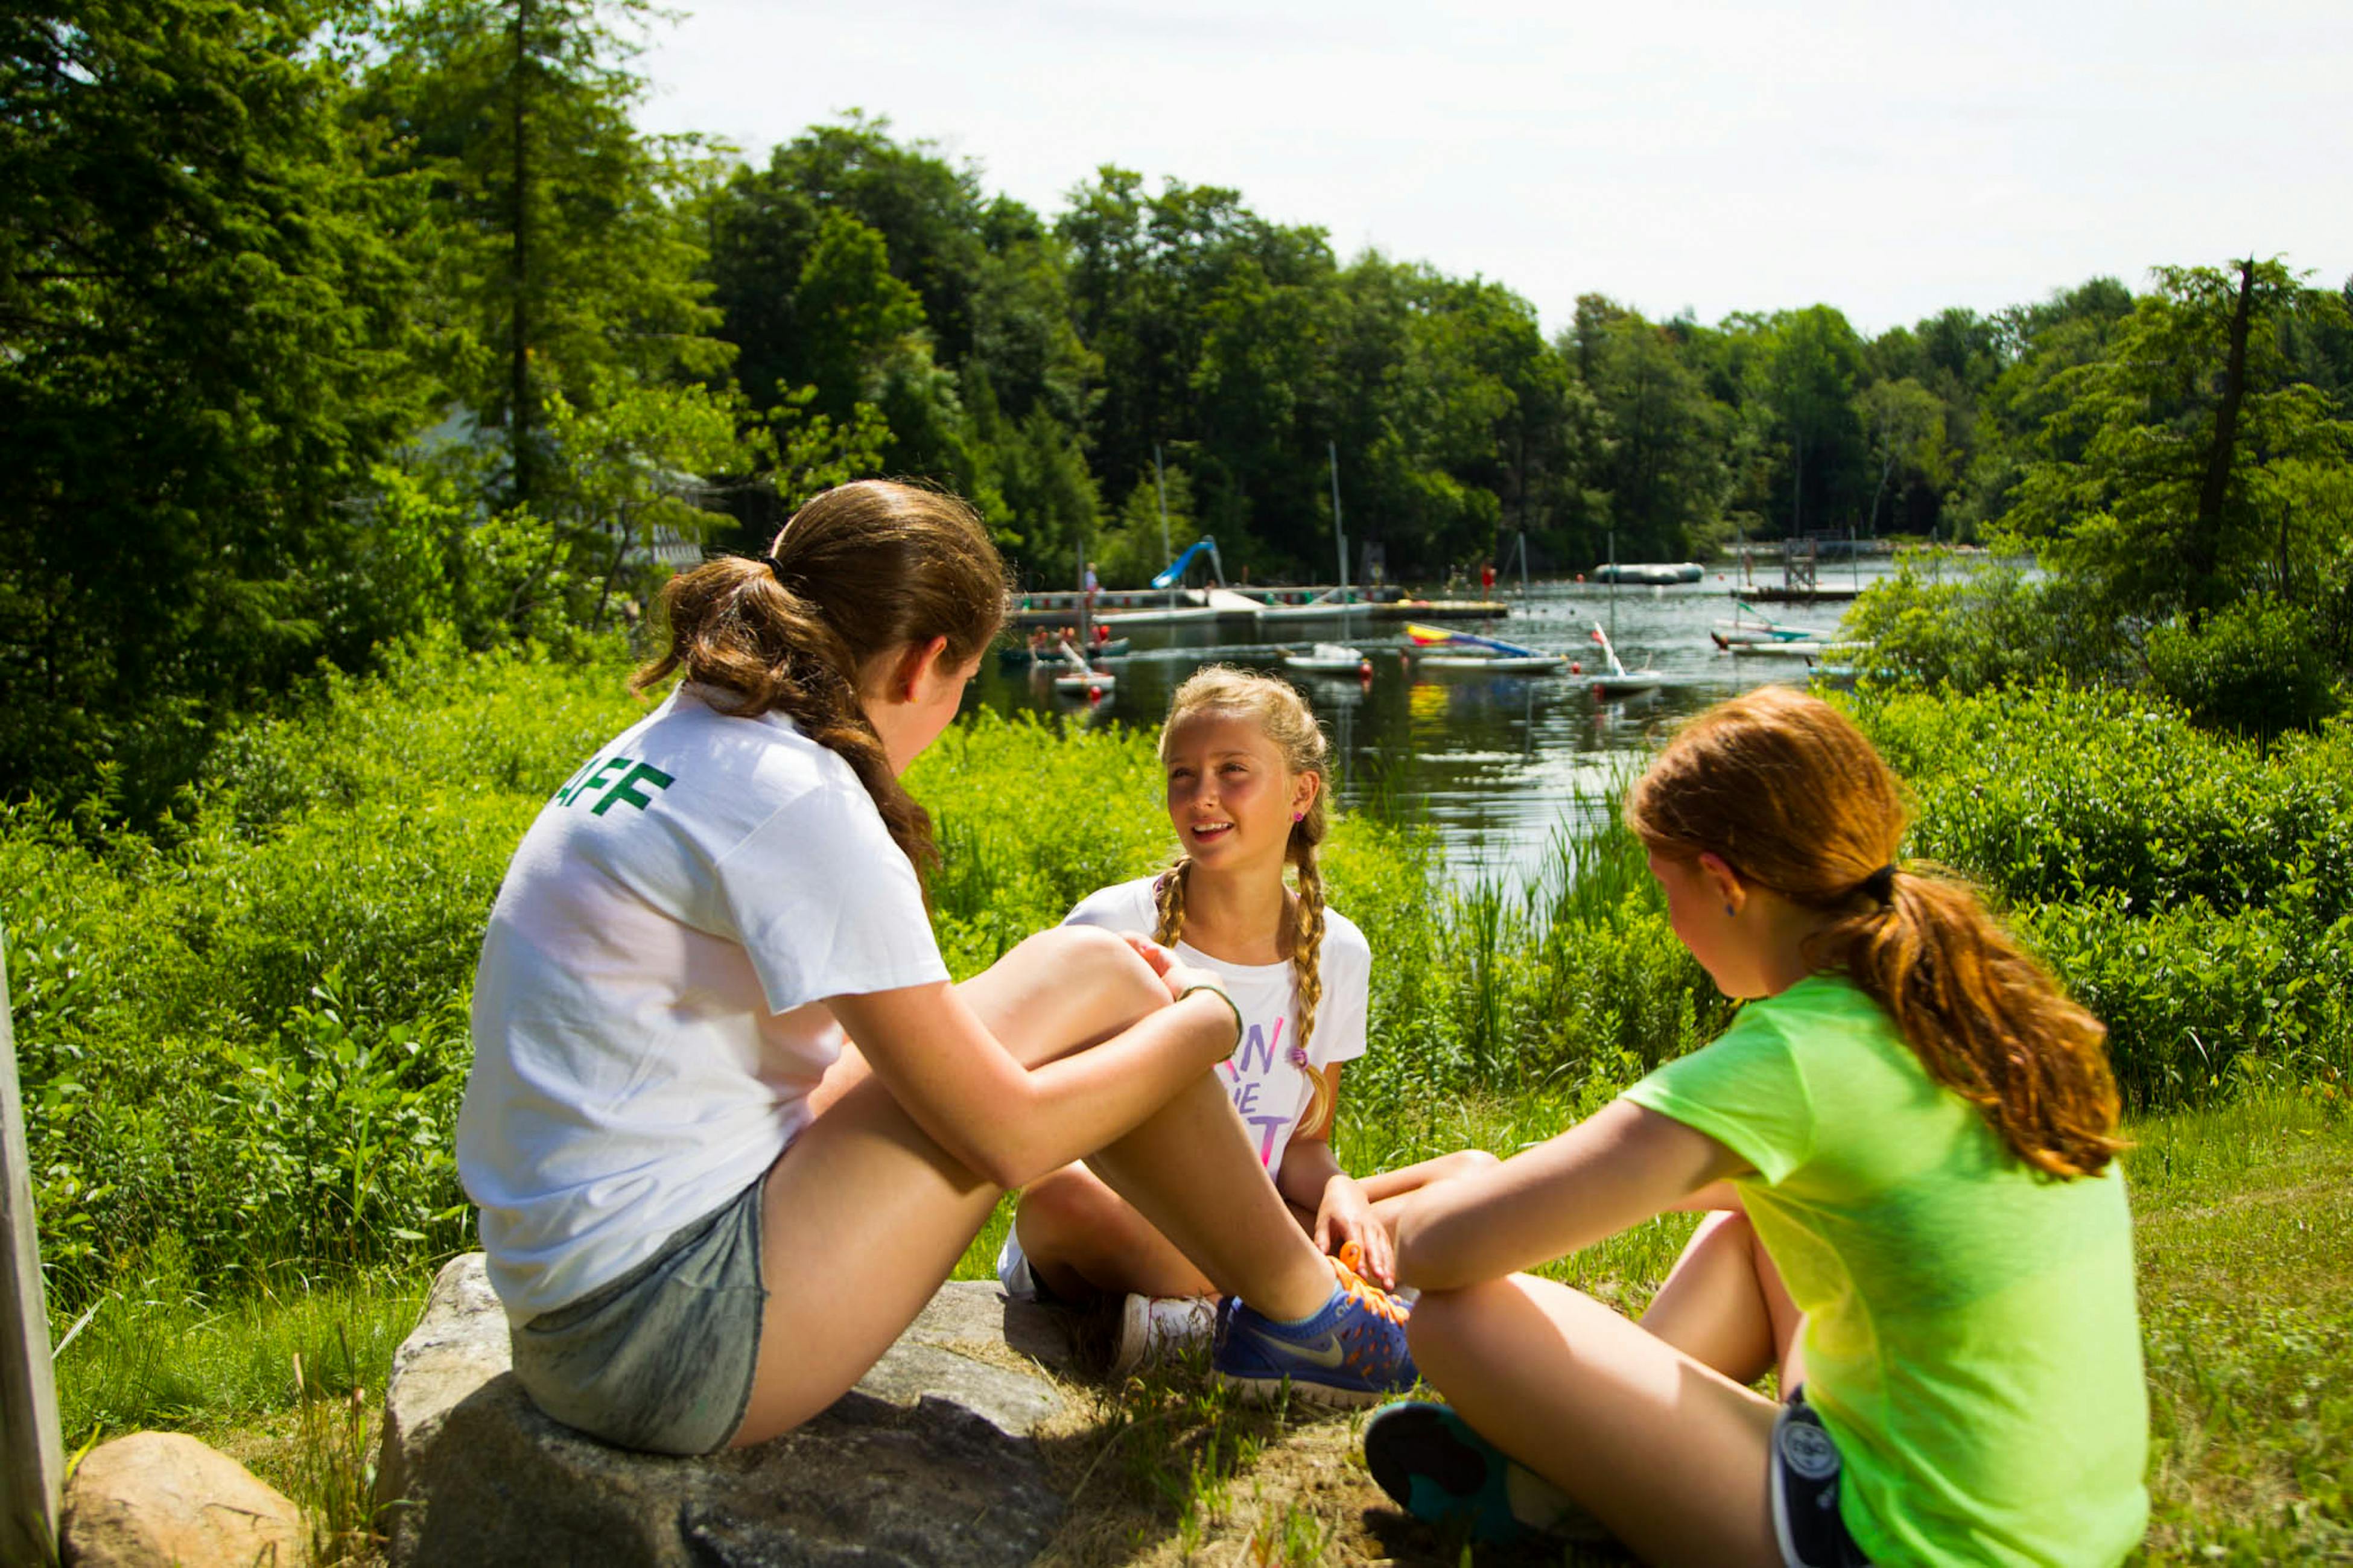 Summer Camp Jobs for College Students, Work at Camp this Summer